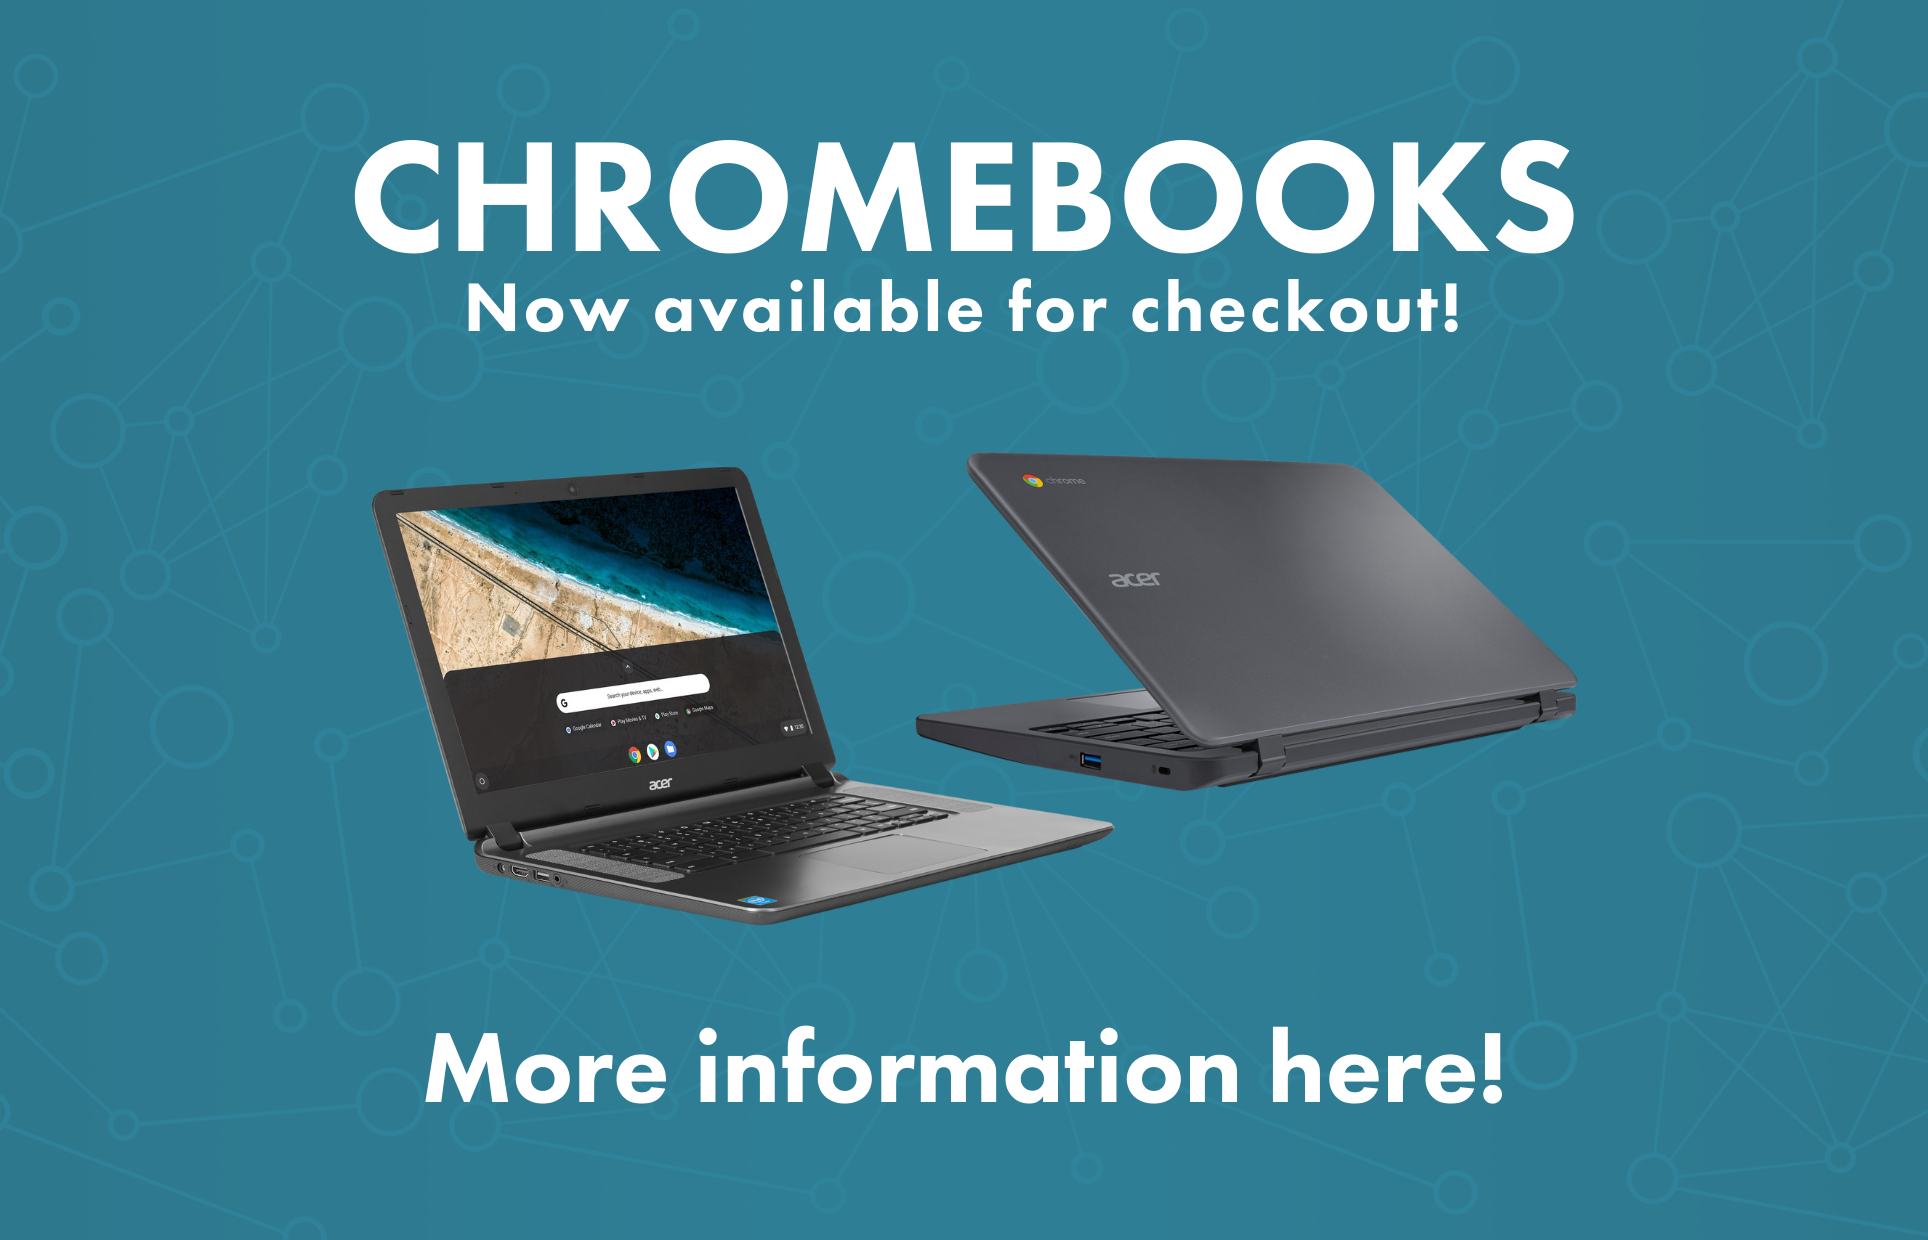 Chromebooks now available for checkout